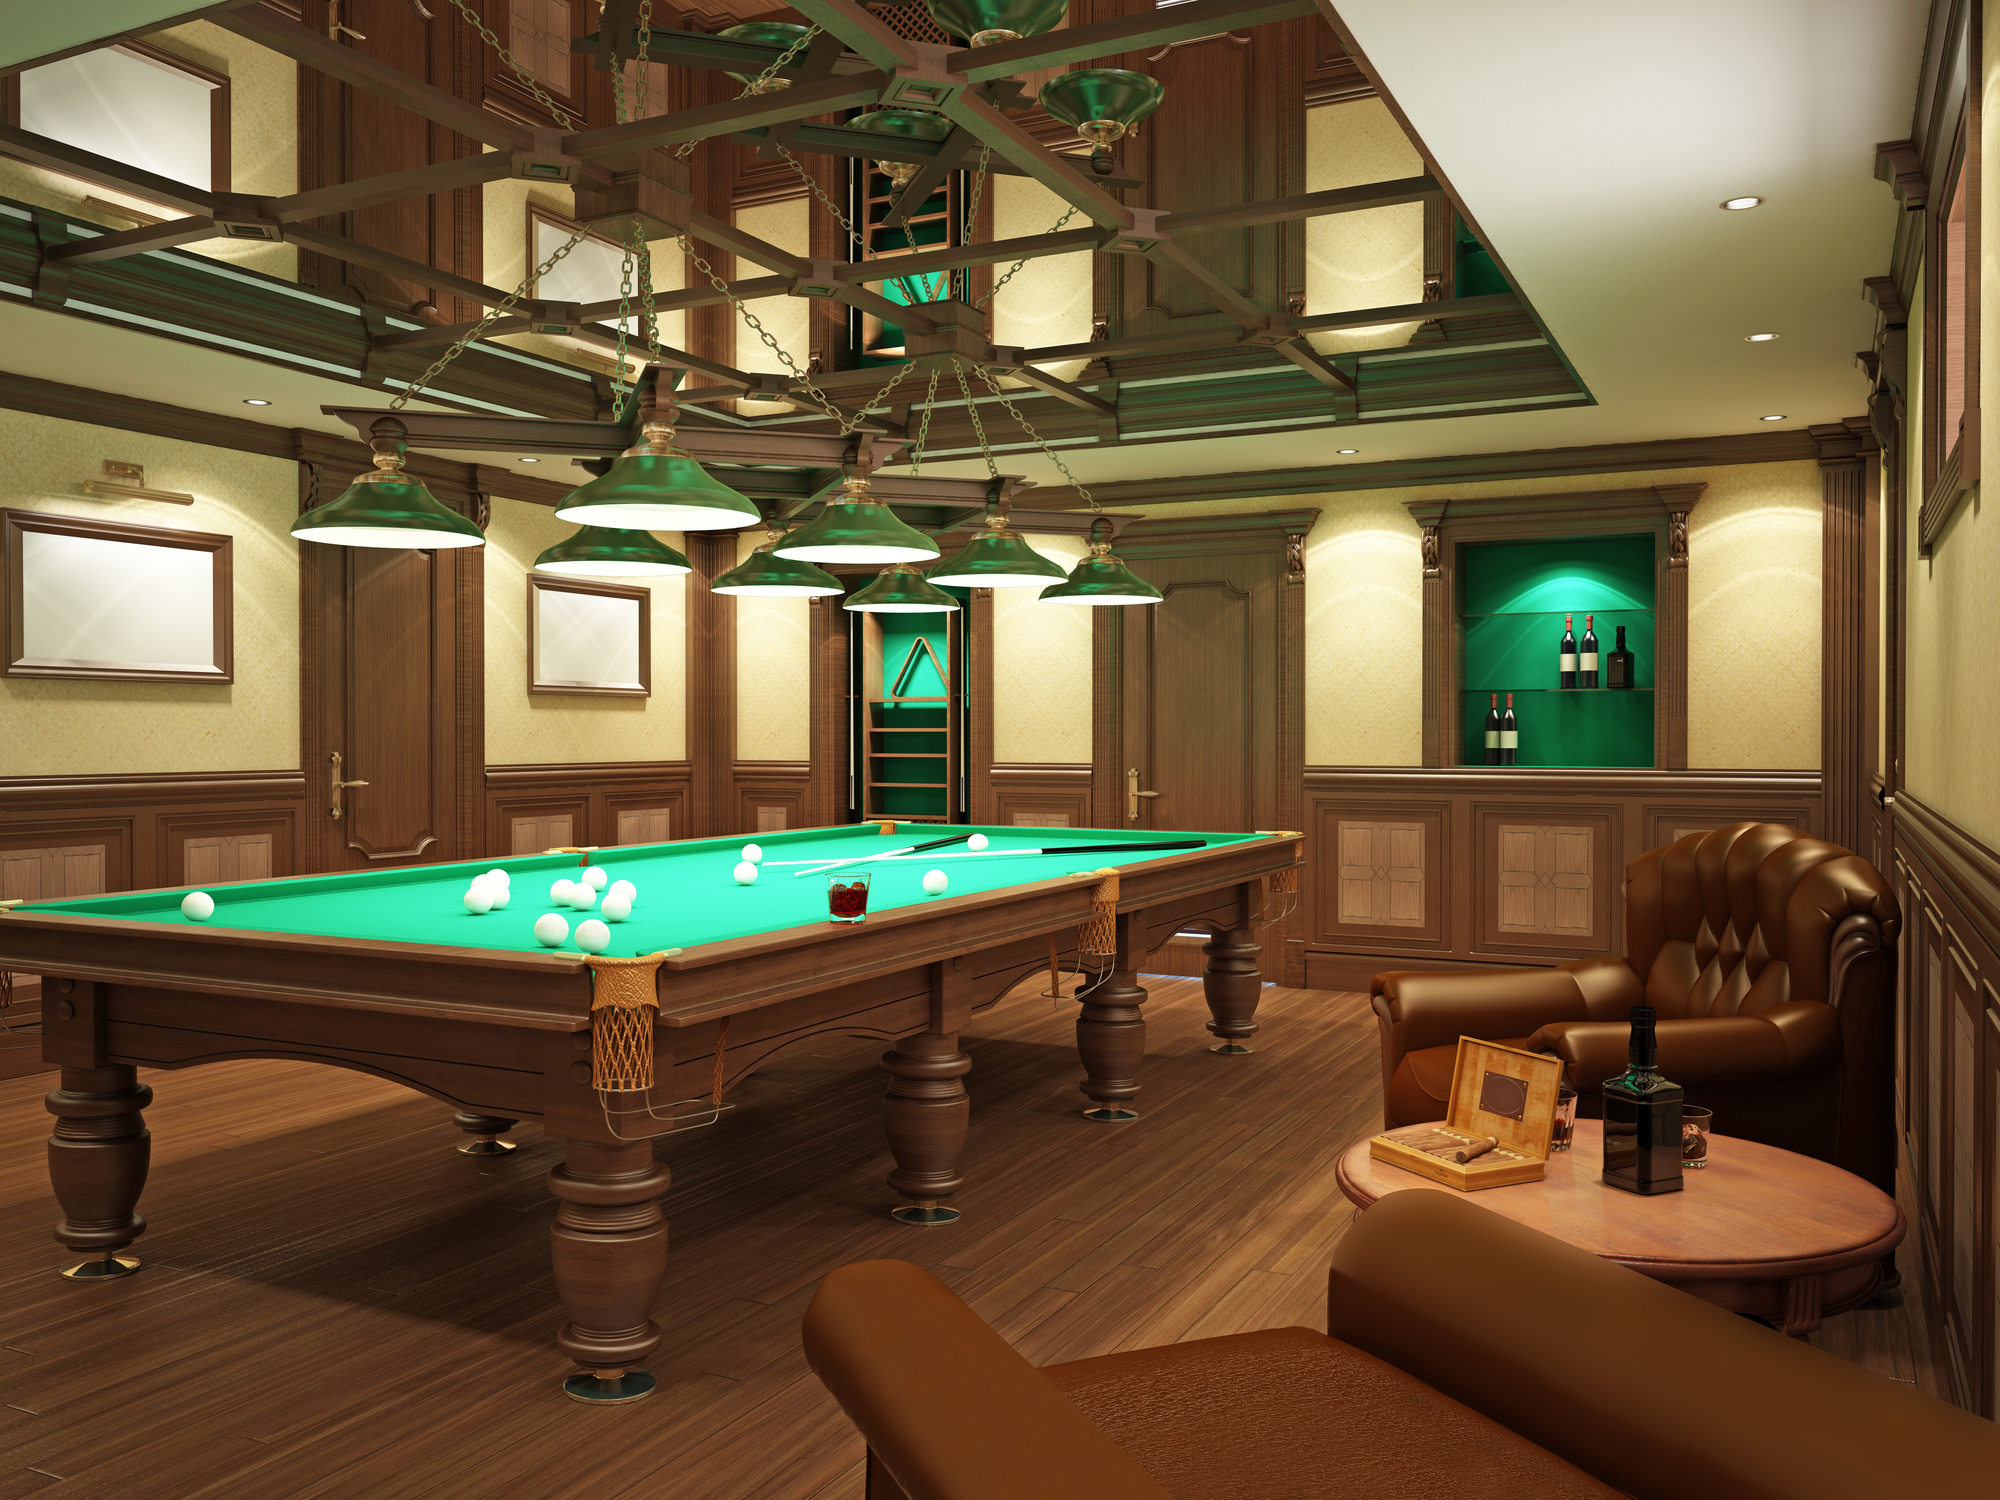 10 Pool Room Accessories That Will Keep Your Guests Entertained